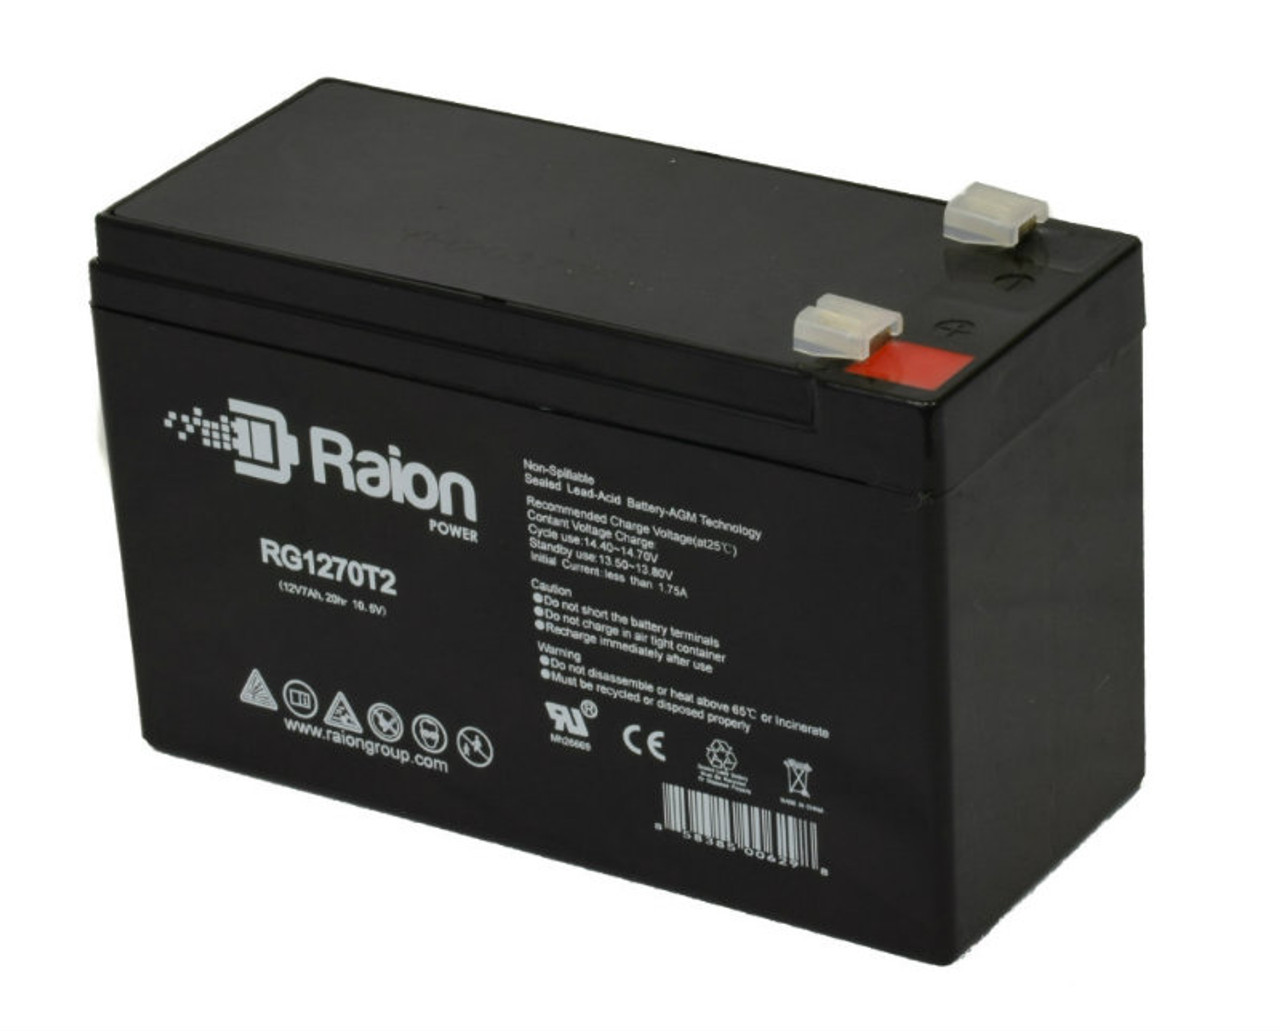 Raion Power RG1270T1 12V 7Ah Non-Spillable Replacement Battery for Ultracell UL7-12 F1